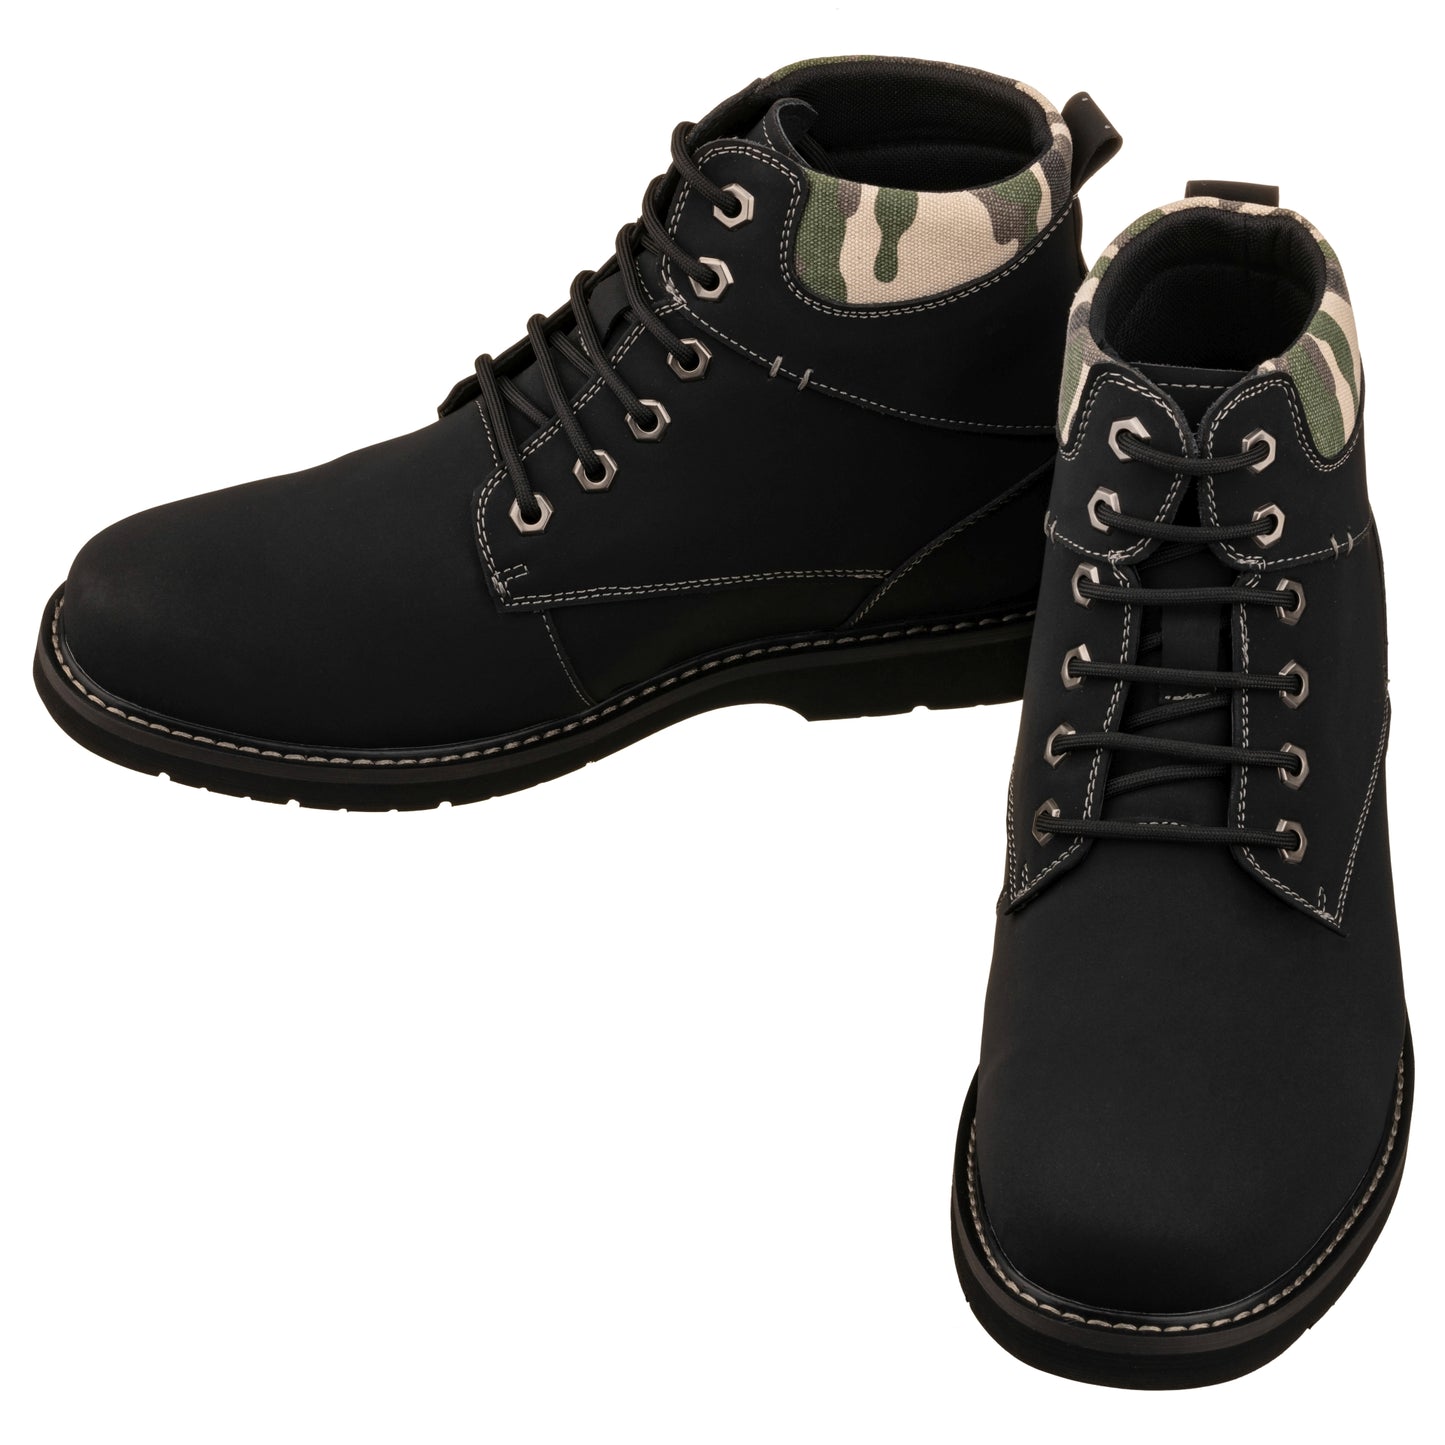 Elevator shoes height increase CALTO - YH7831 - 3.2 Inches (Black) - Nubuck Boots